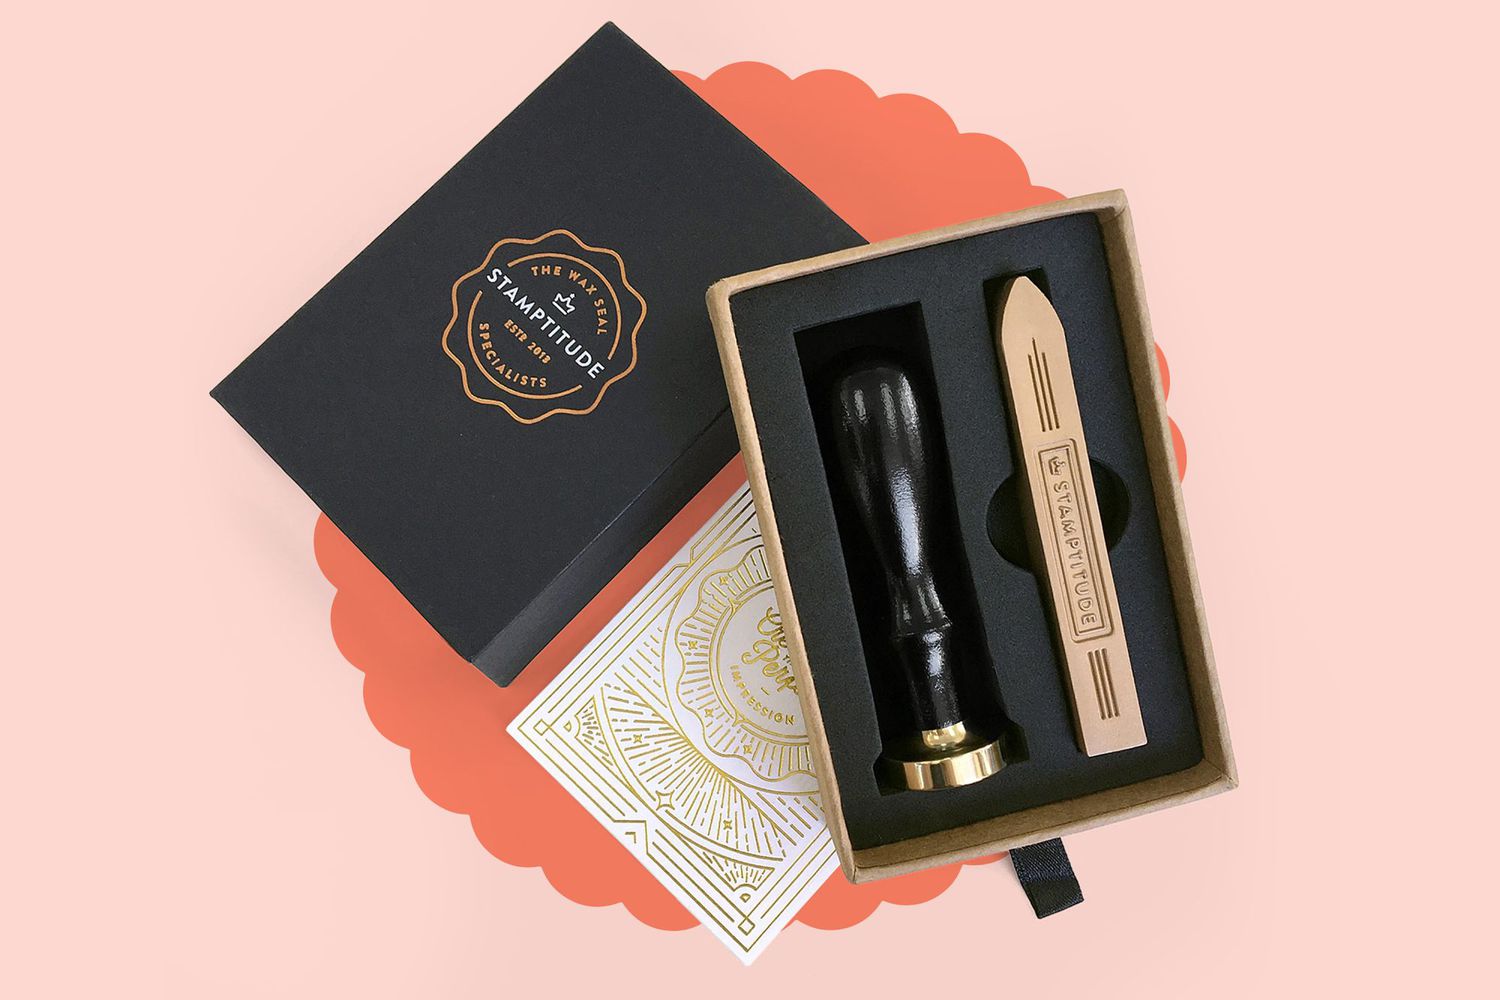 Engagement Gift ideas: Stamptitude wax seal and stamp